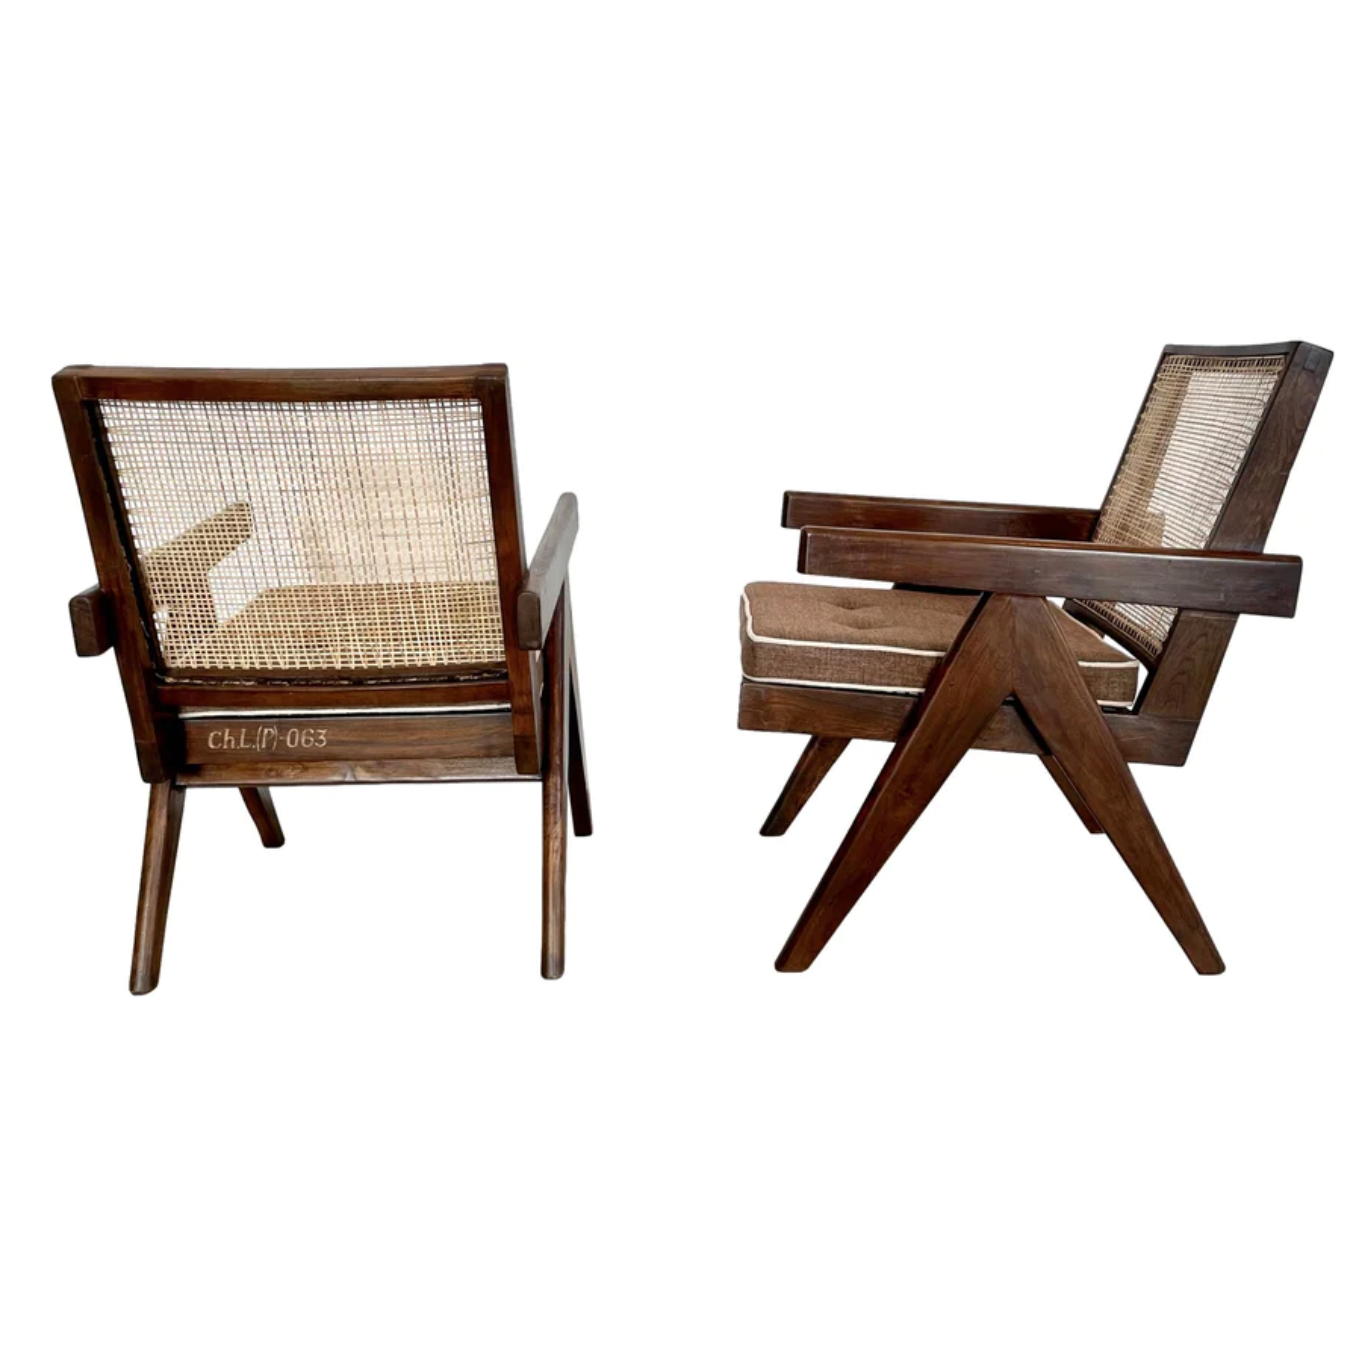   PIERRE JEANNERET EASY CHAIRS, 1950S CHANDIGARGH